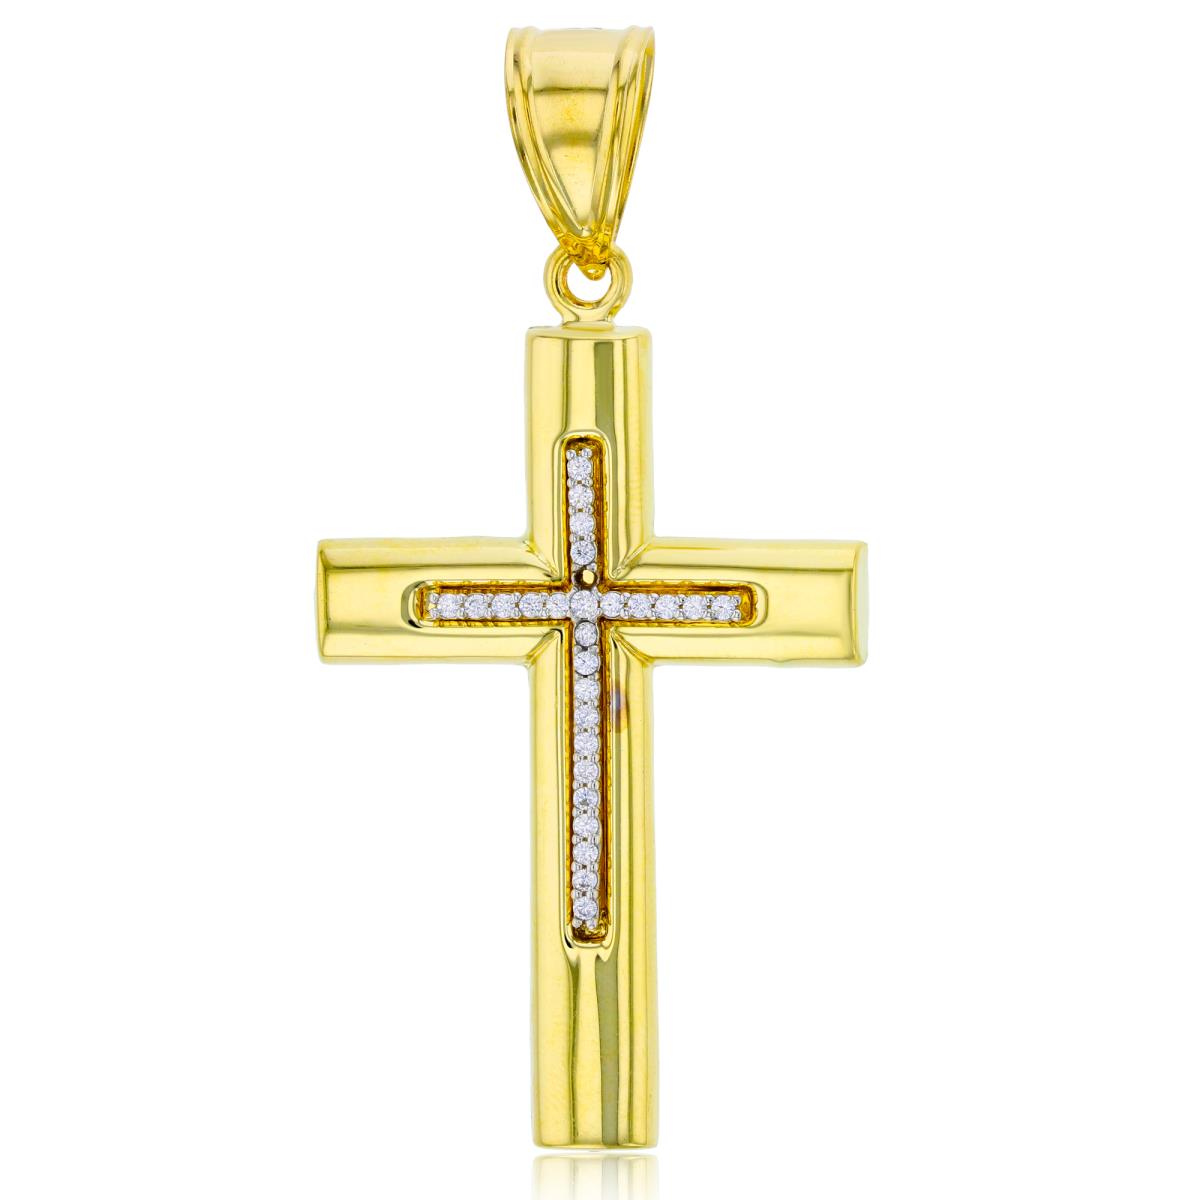 14K Yellow Gold 62x30mm HP Cross with Paved Center Pendant